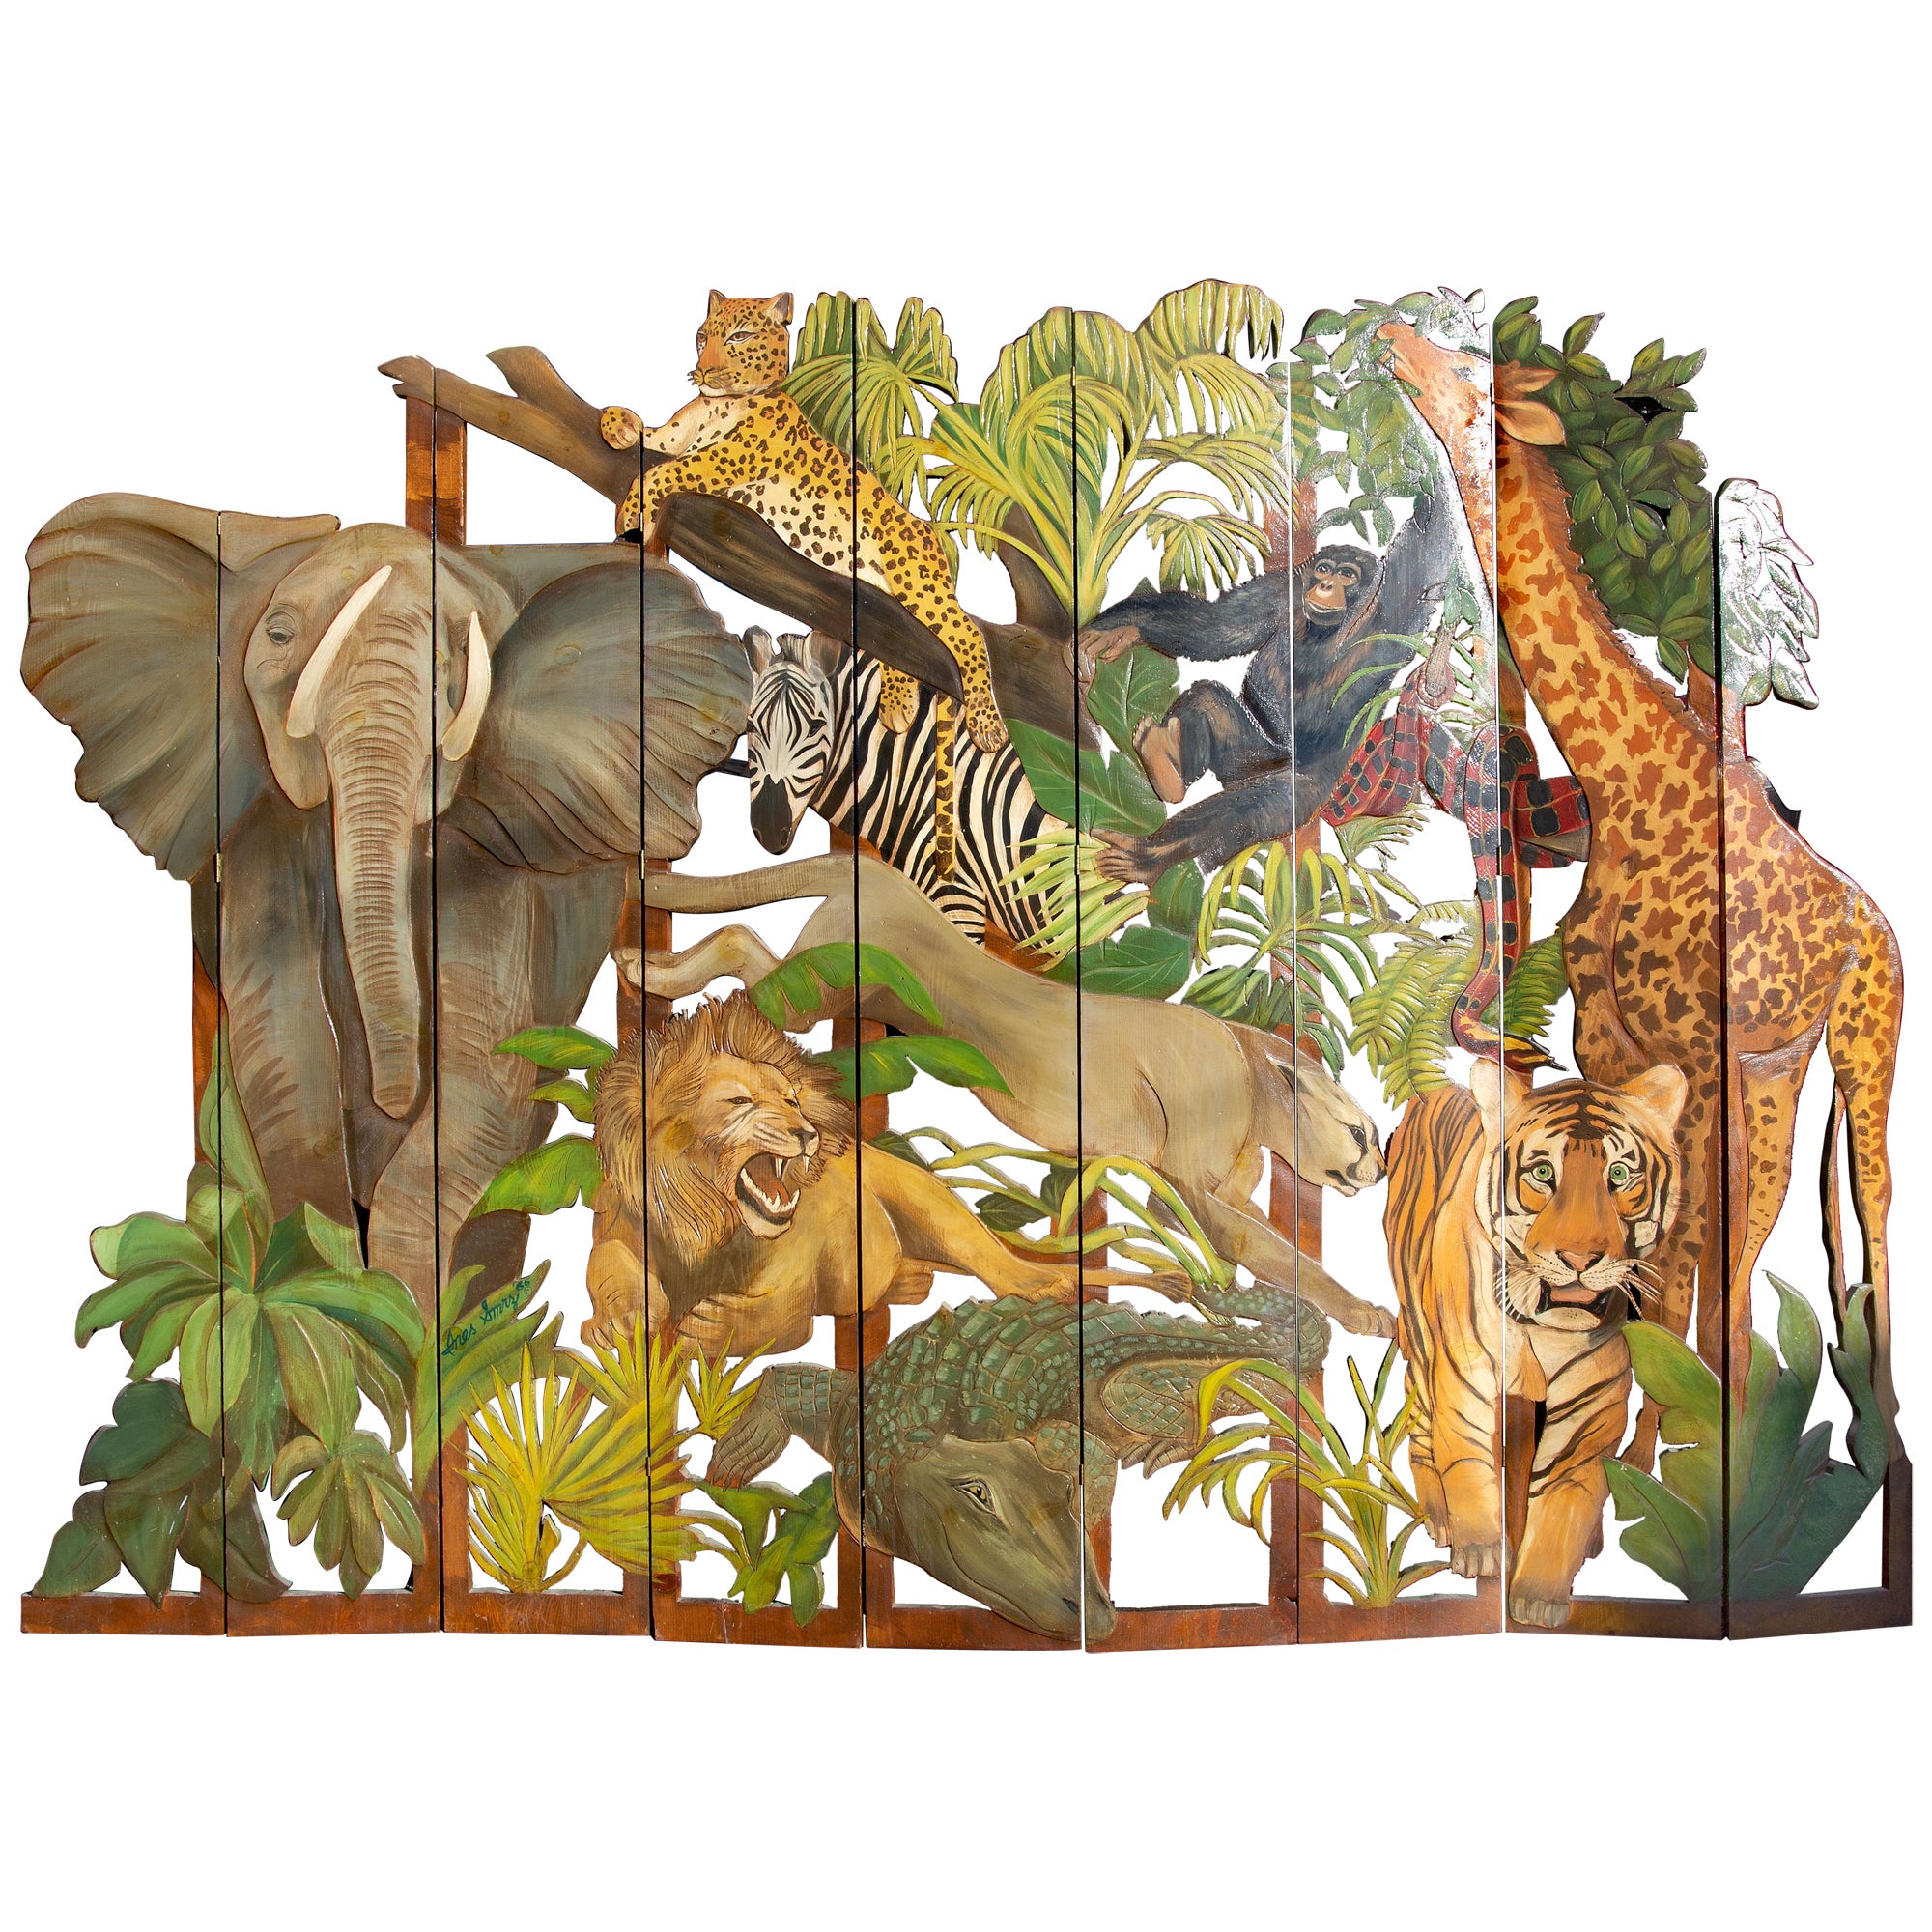 ines smrz Animal Painting - Carved African Jungle Screen with Exotic Wild Animals Signed